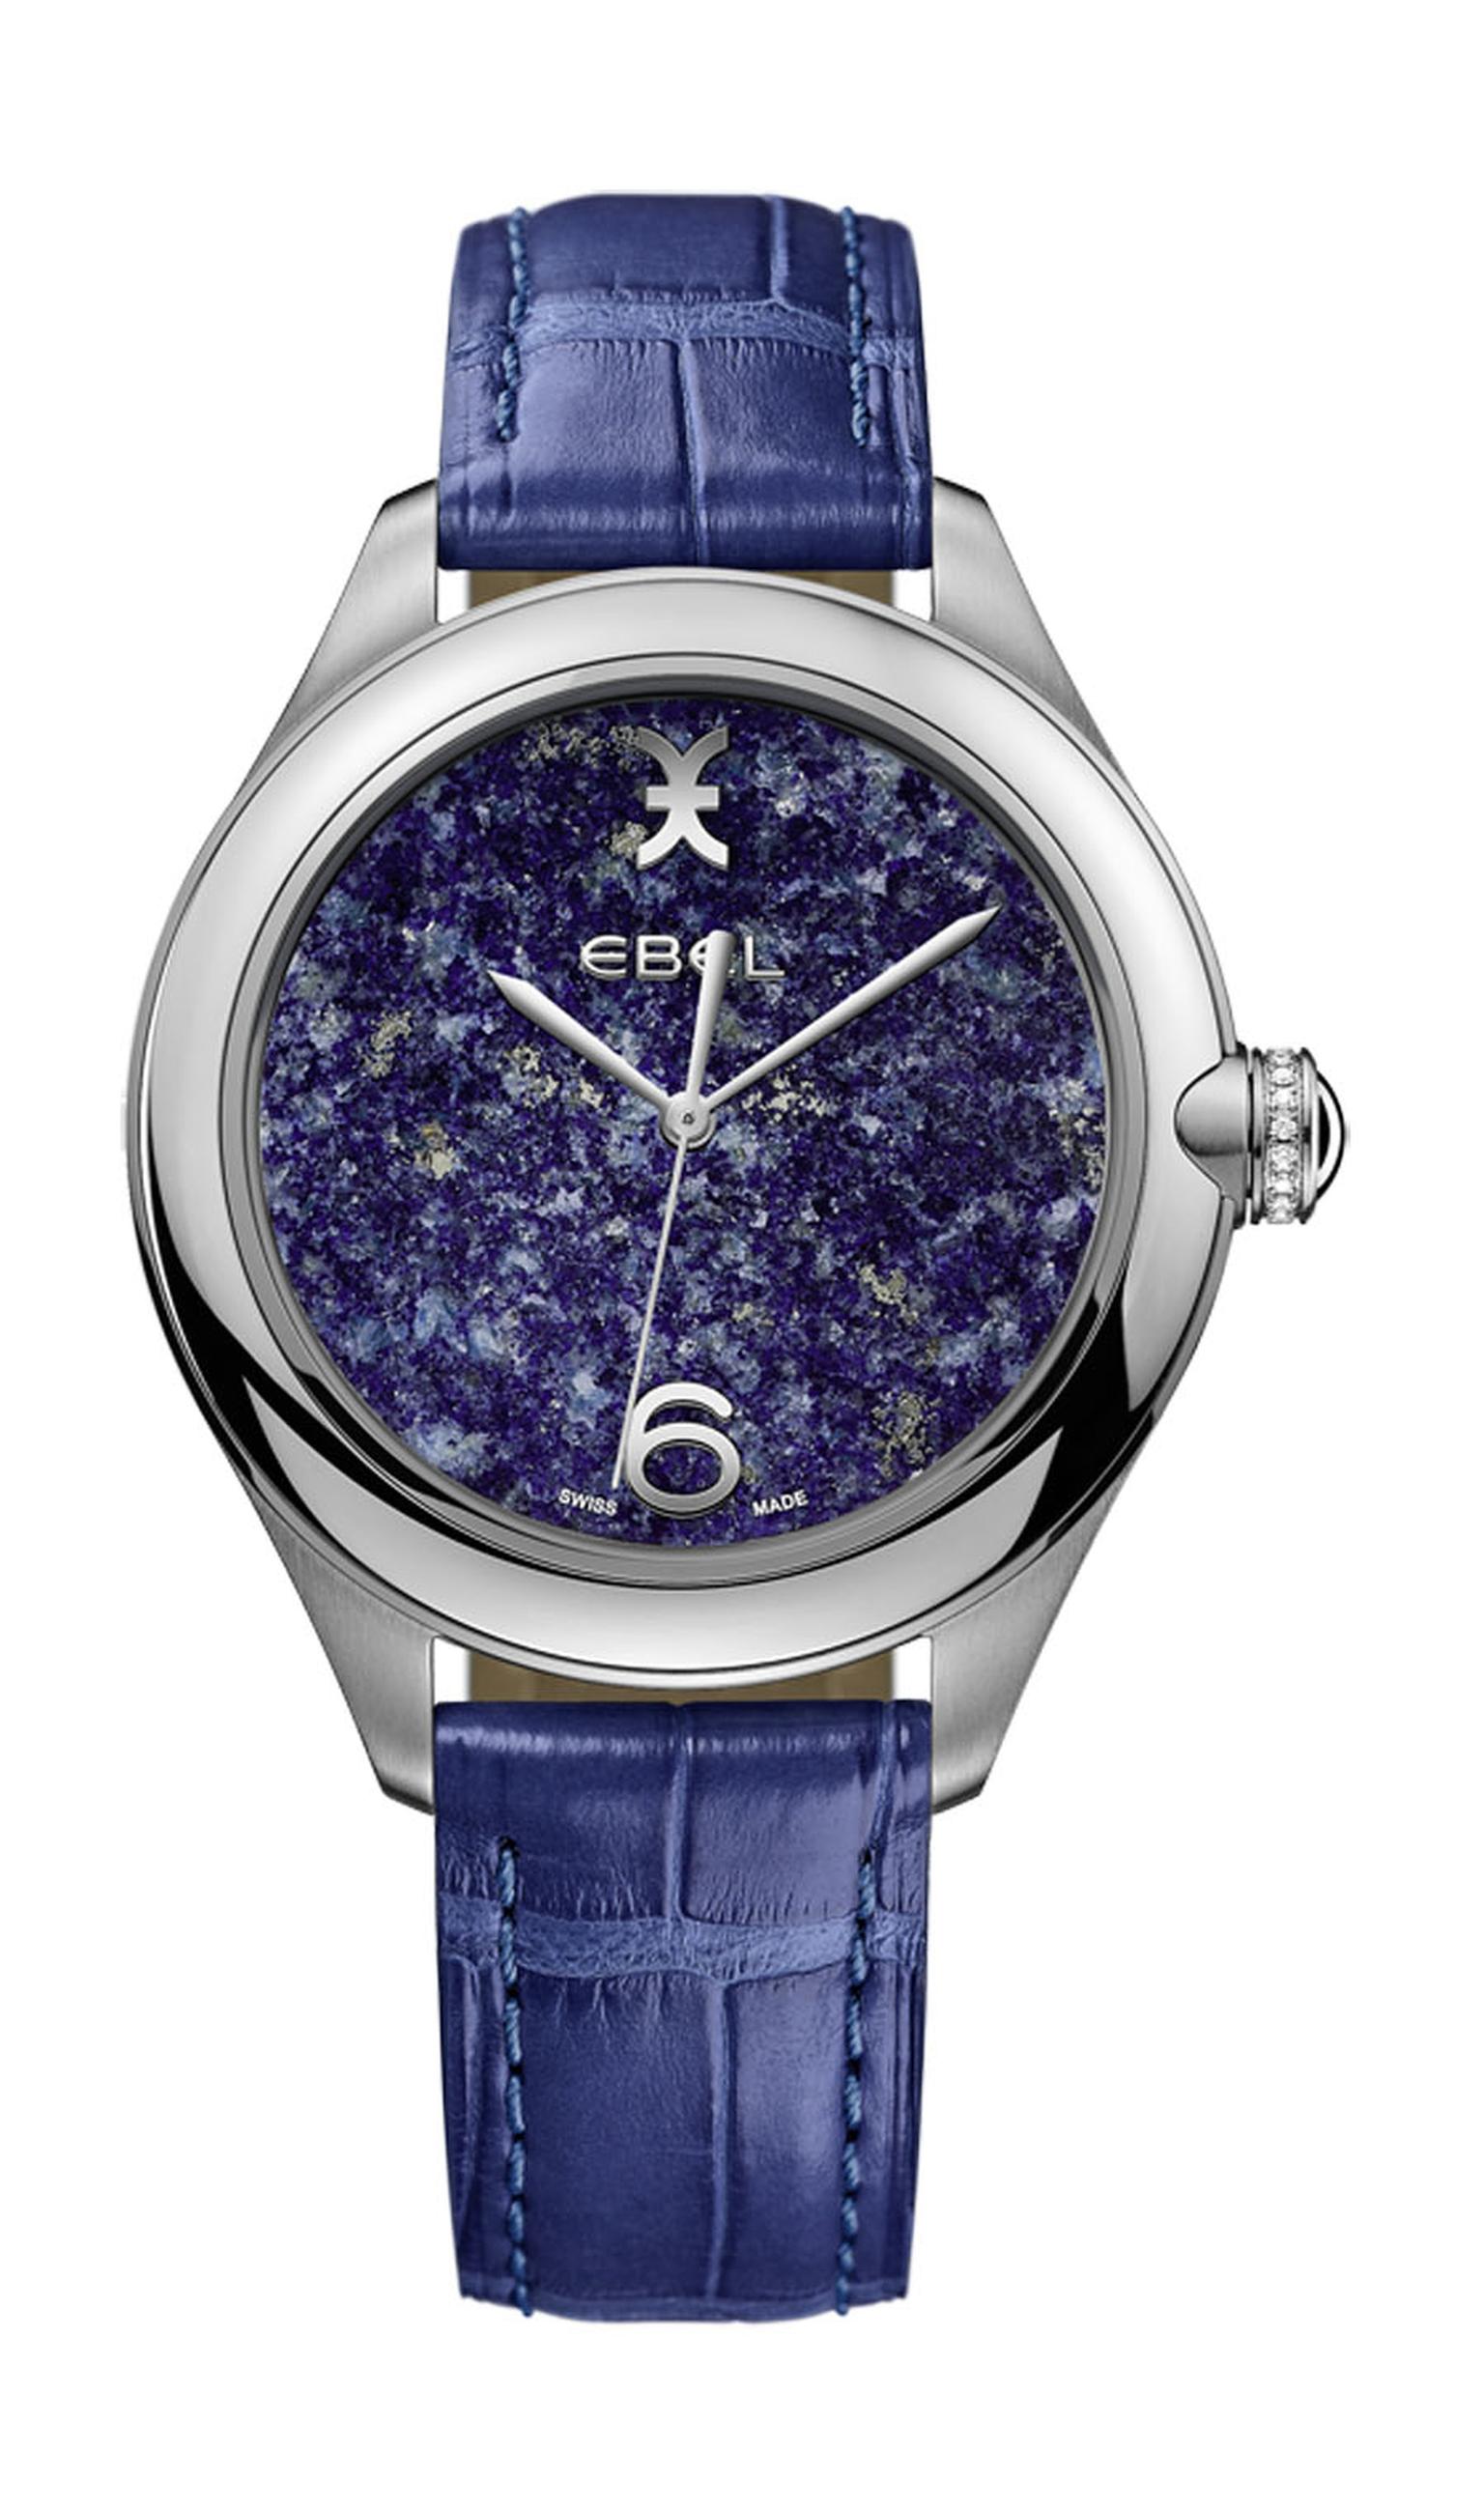 The entrancing colours of lapis lazuli have left wearers spellbound for millenniums